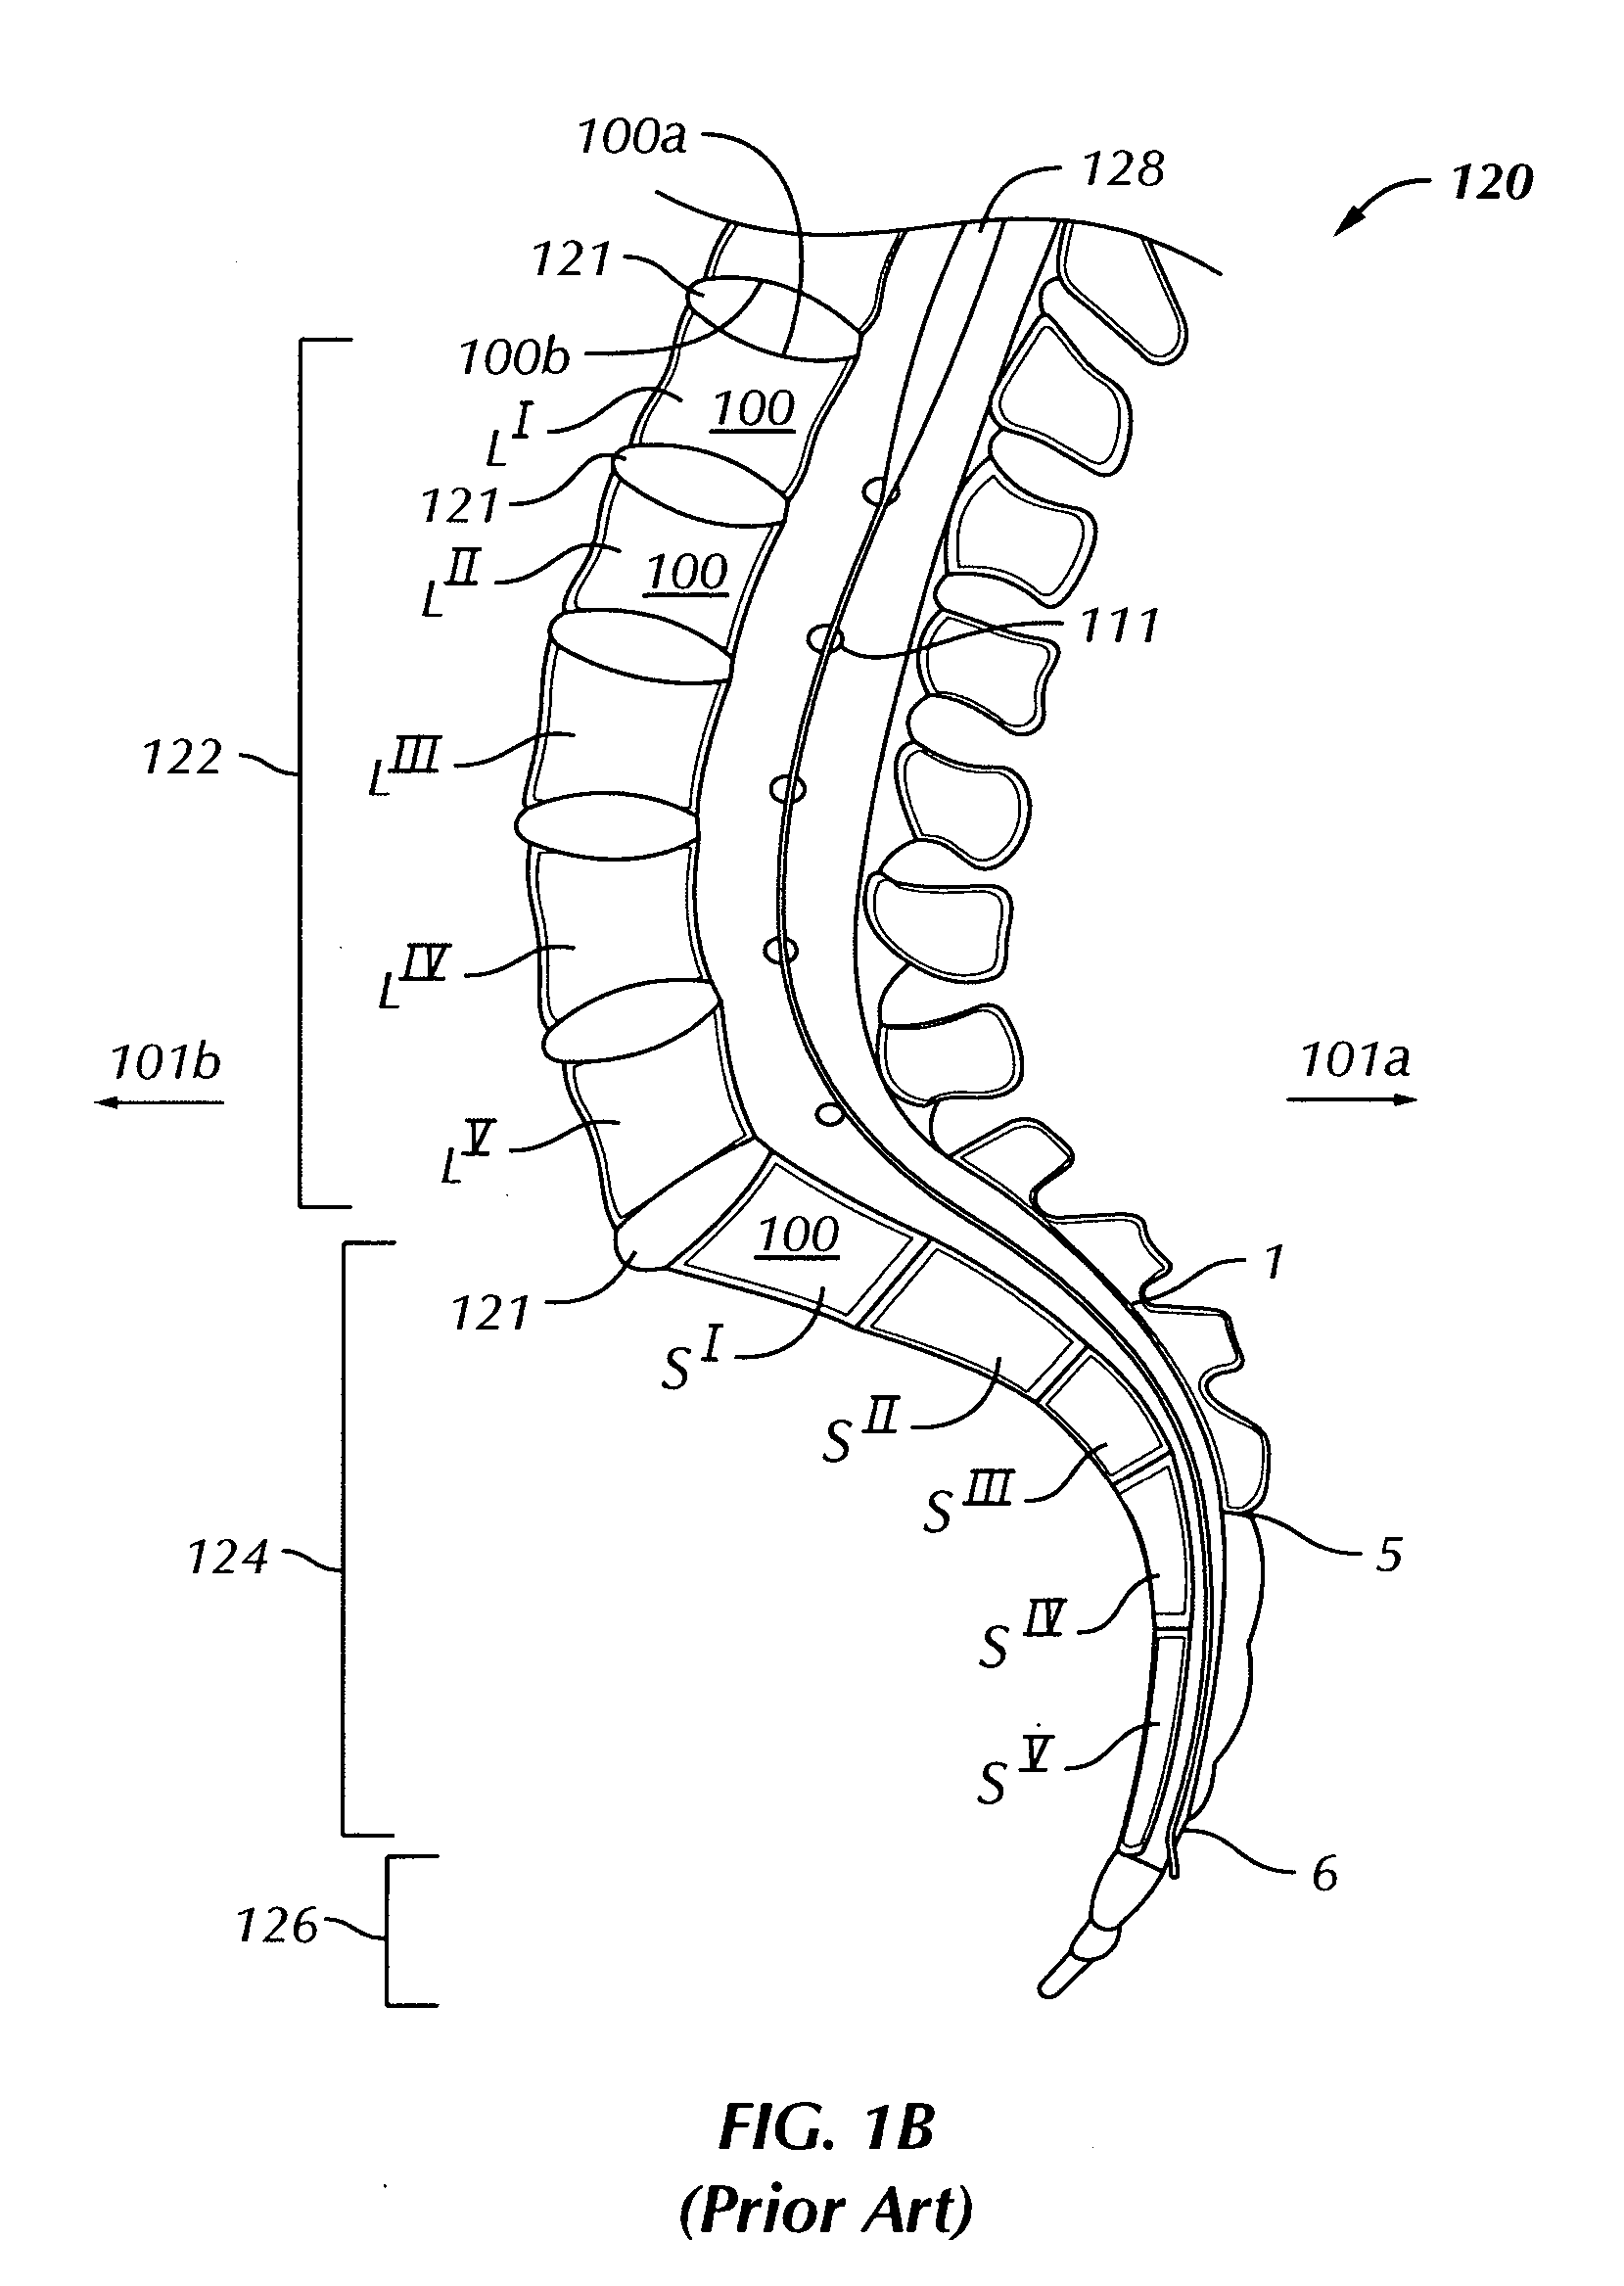 Internal fixation system for spine surgery